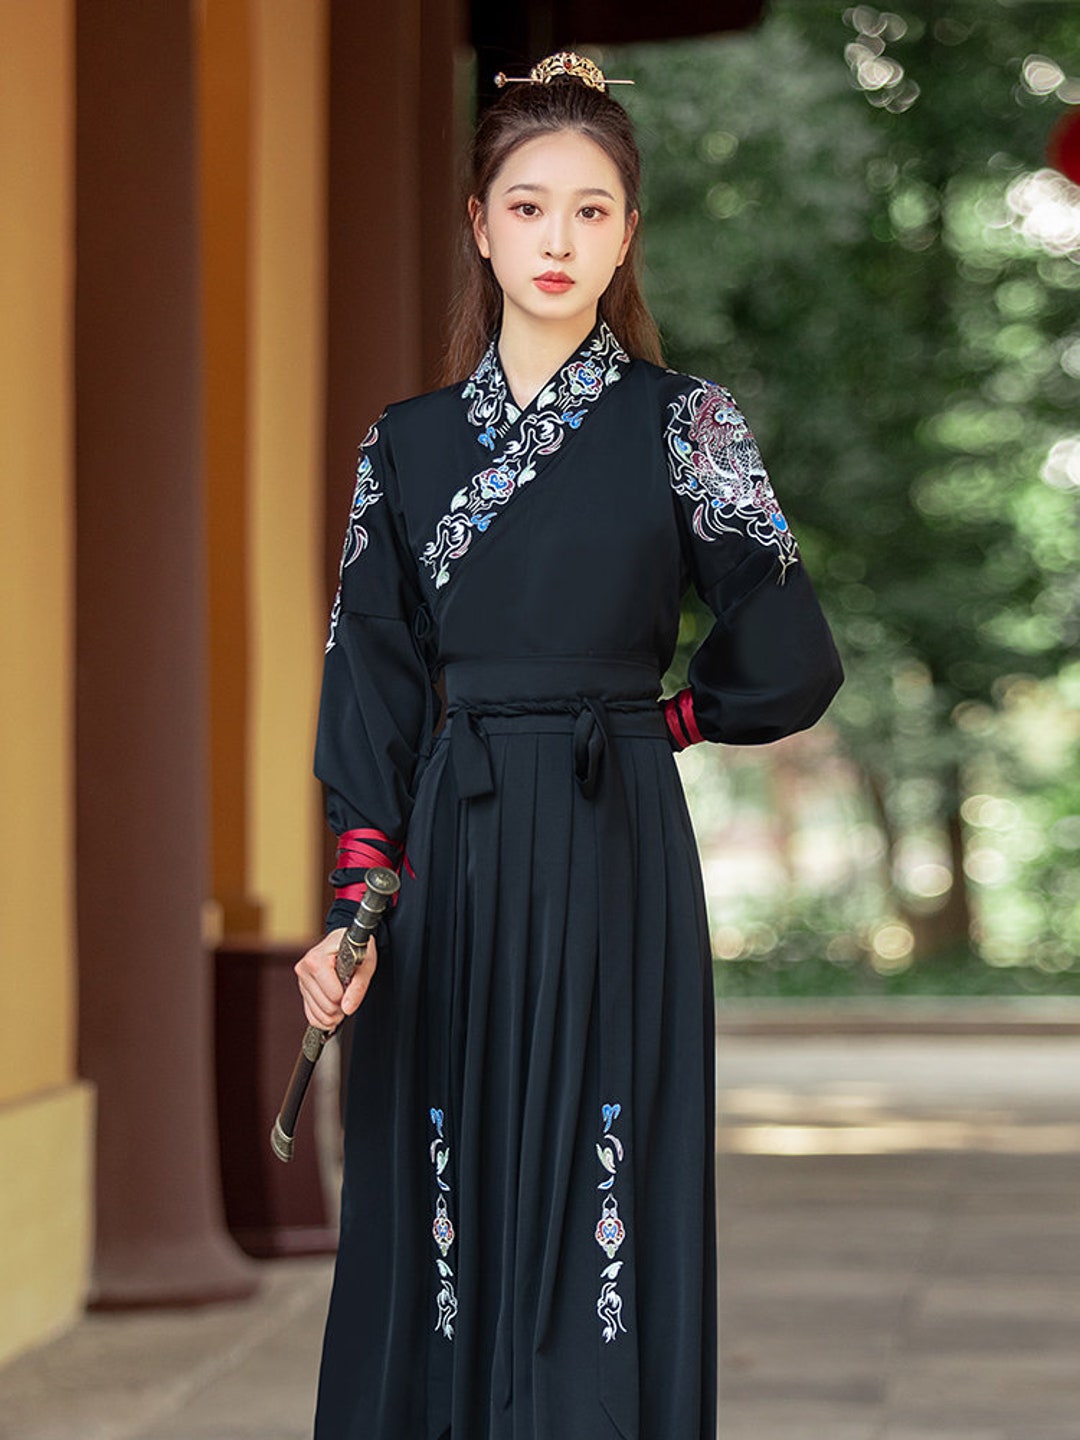 Hanfu Female Chivalrys Handsome Waist Skirt Black Wuxia Style Embroidered  Ancient Costumechinese Traditional Vintage Hanfu 